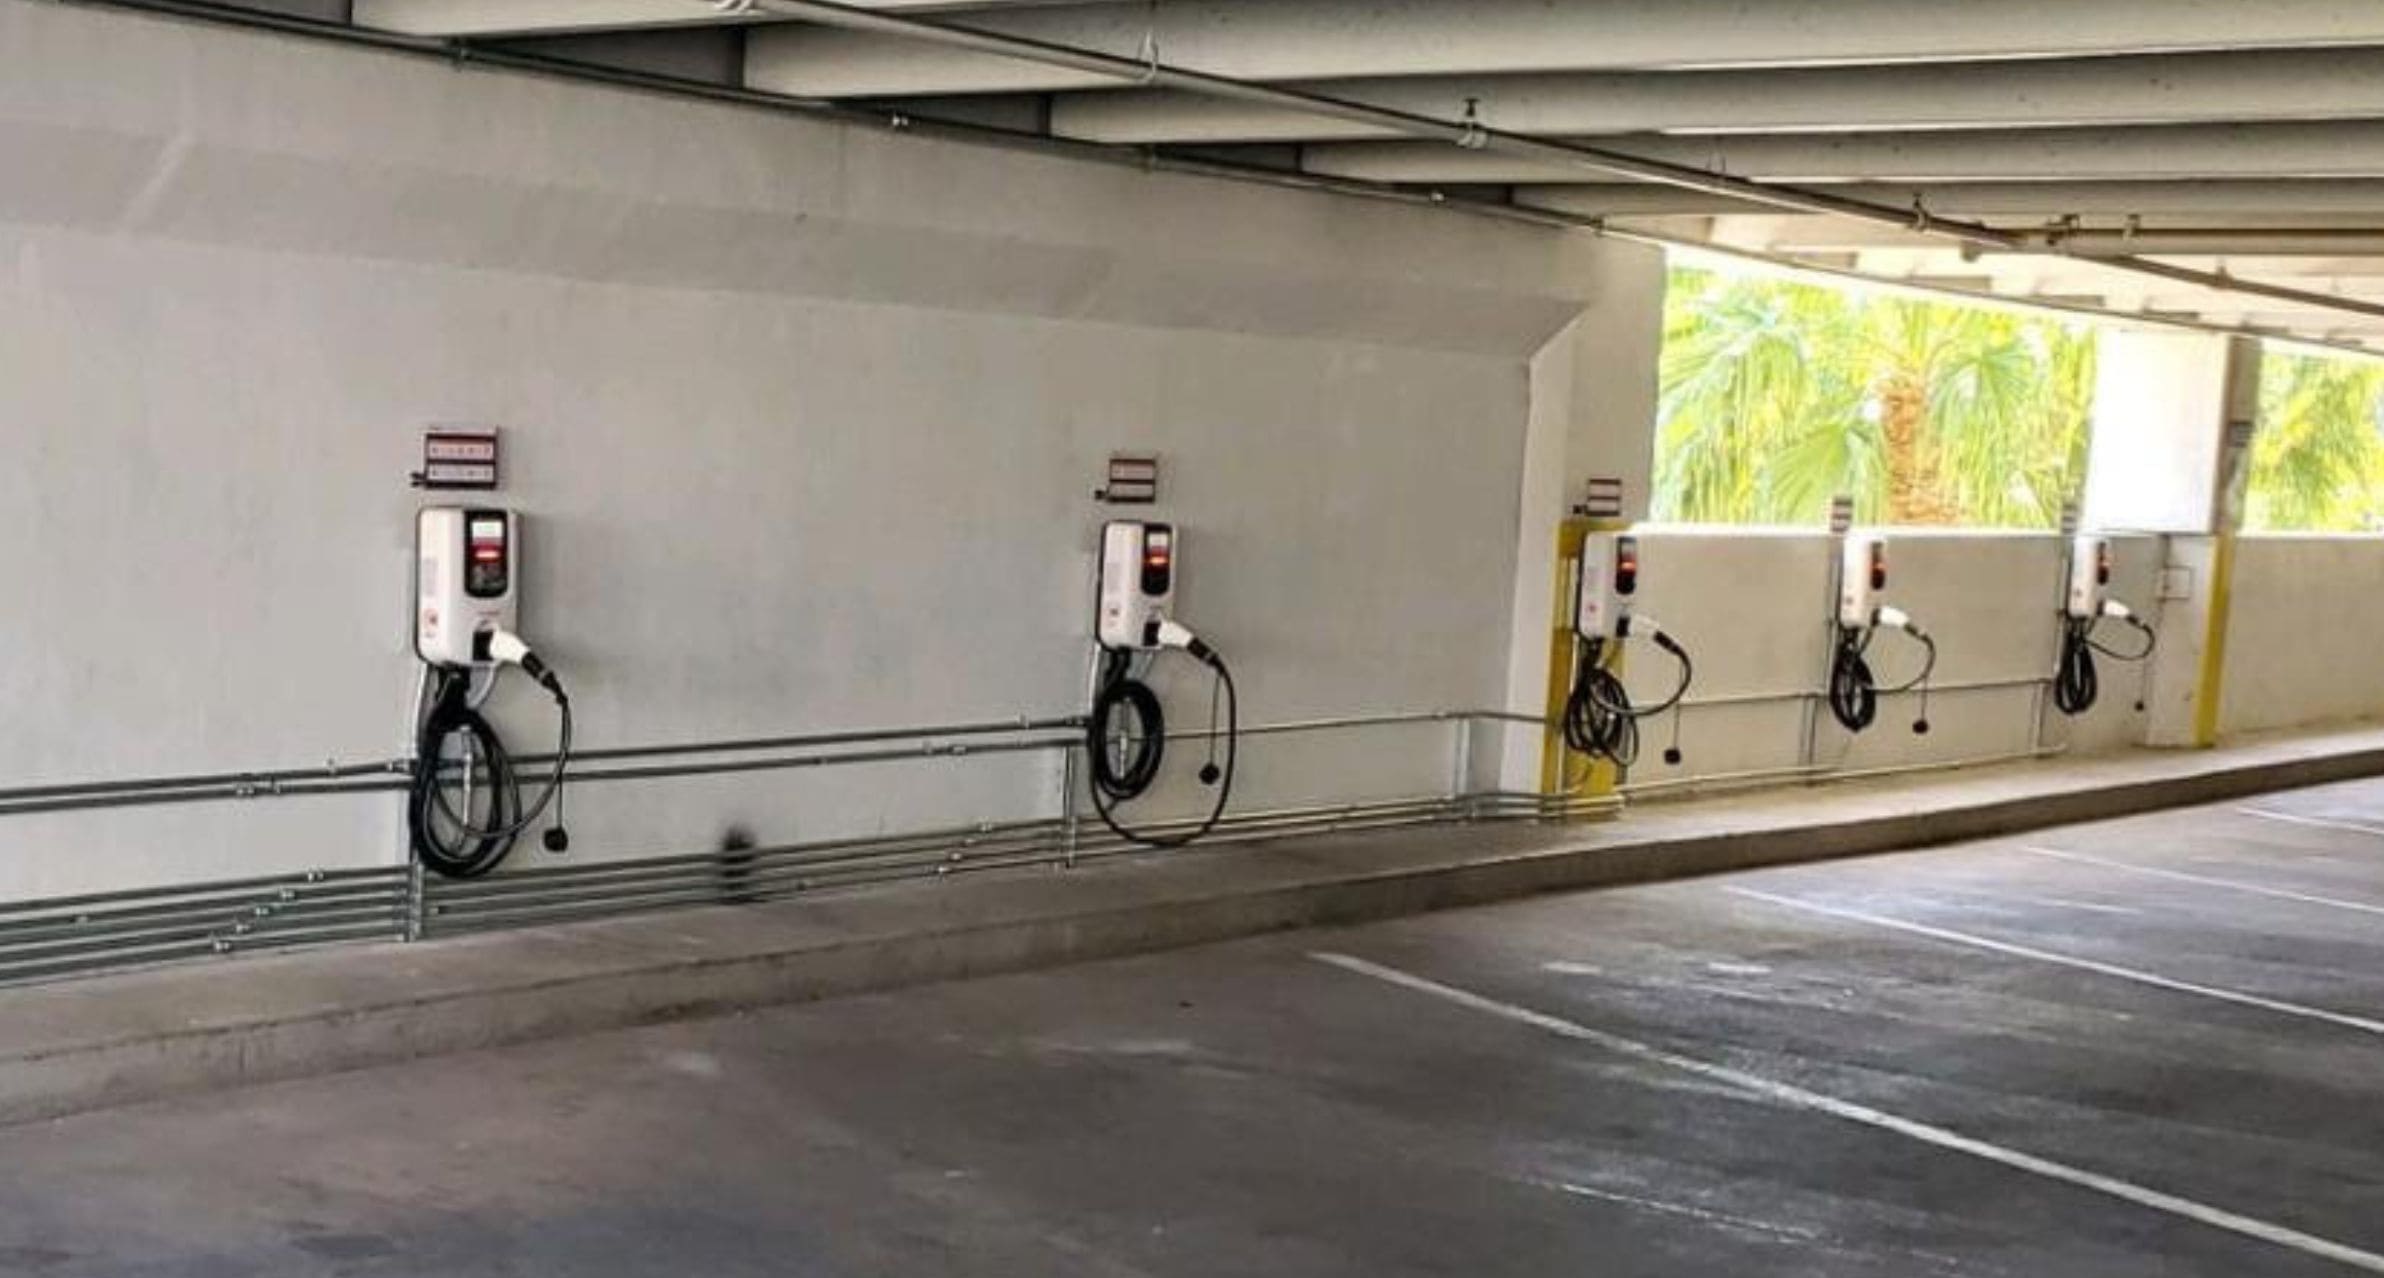 PR - Noodoe, a global leader in EV charging technology, is helping to mark the re-opening of the iconic Treasure Island Hotel & Casino with activation of six advanced S1000 EV Charging Stations.